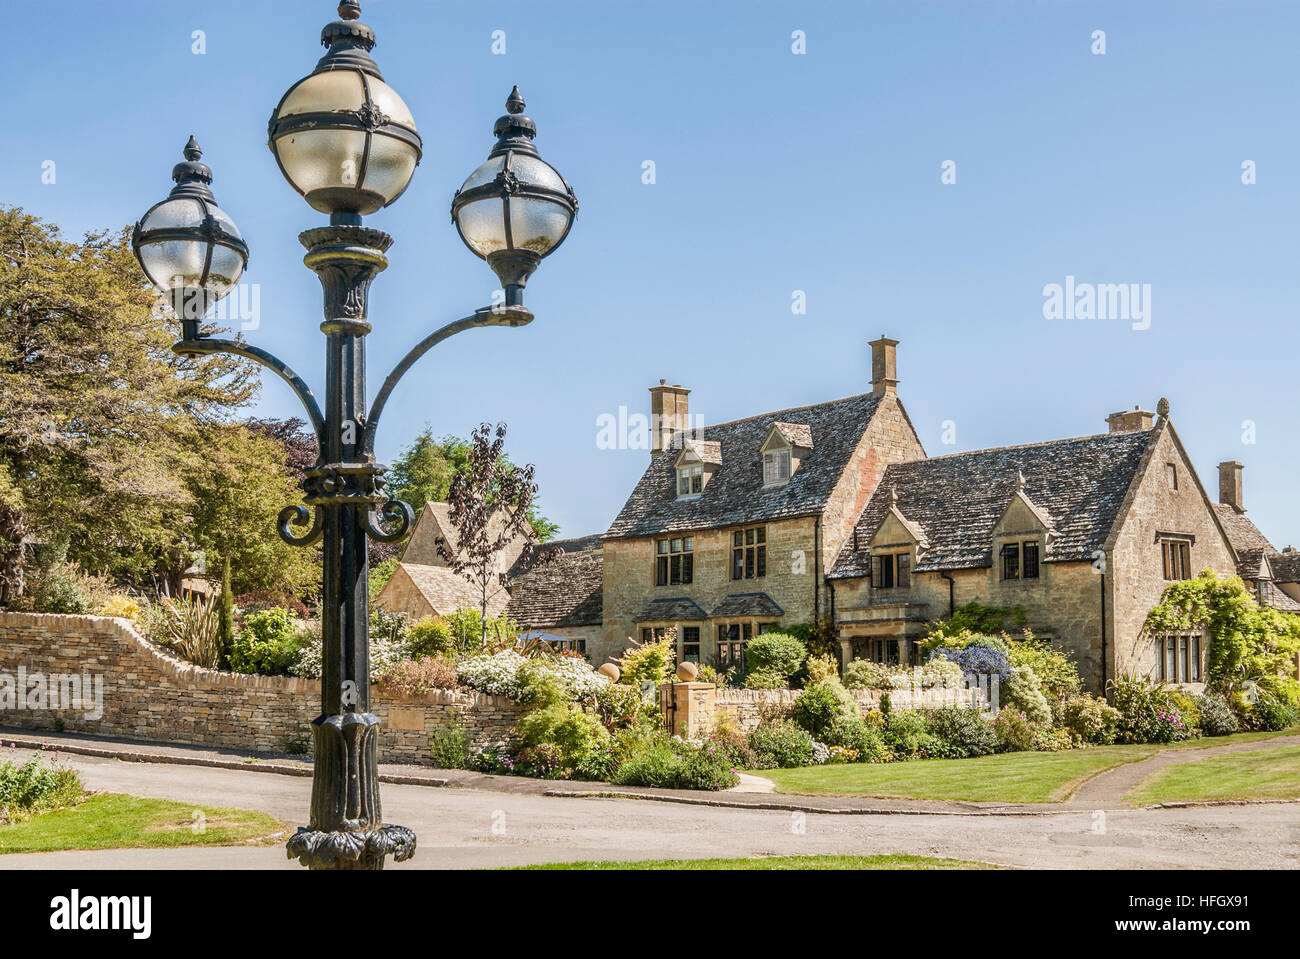 Cotsworld Cottage in Chipping Campden a small market town within the Cotswold district of Gloucestershire, England Stock Photo